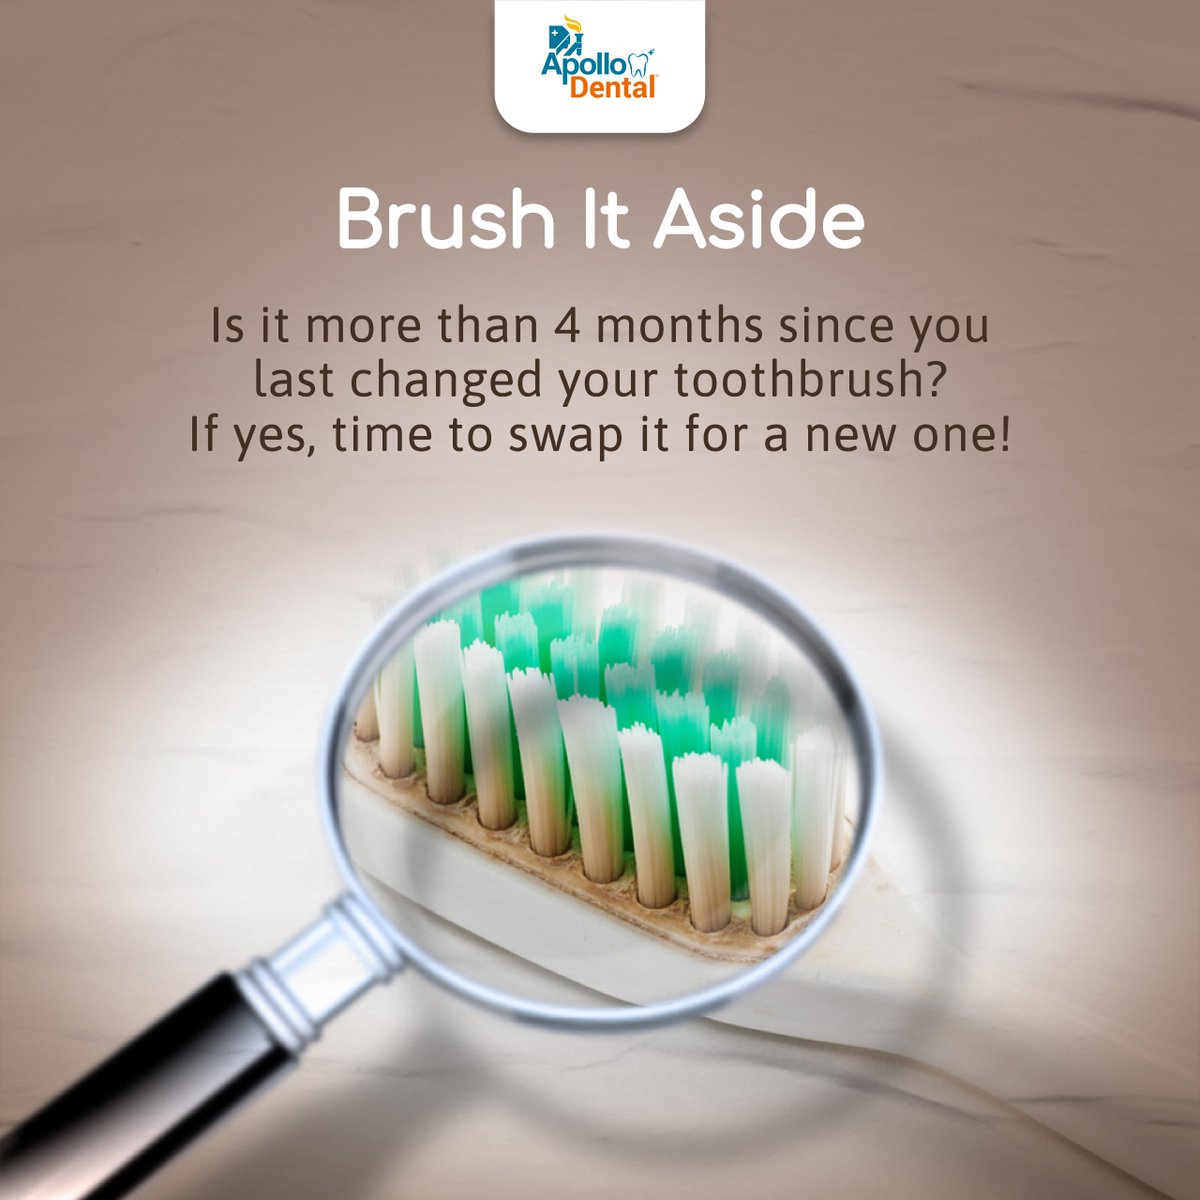 Do you remember when you changed your toothbrush last? Our experts say that one should swap their toothbrush every 2 to 3 months of use. Here's a reminder for you to share with your loved ones.

#ToothbrushReminder #OralHygieneTip #DentalCare #HealthyHabits #OralHealthReminder